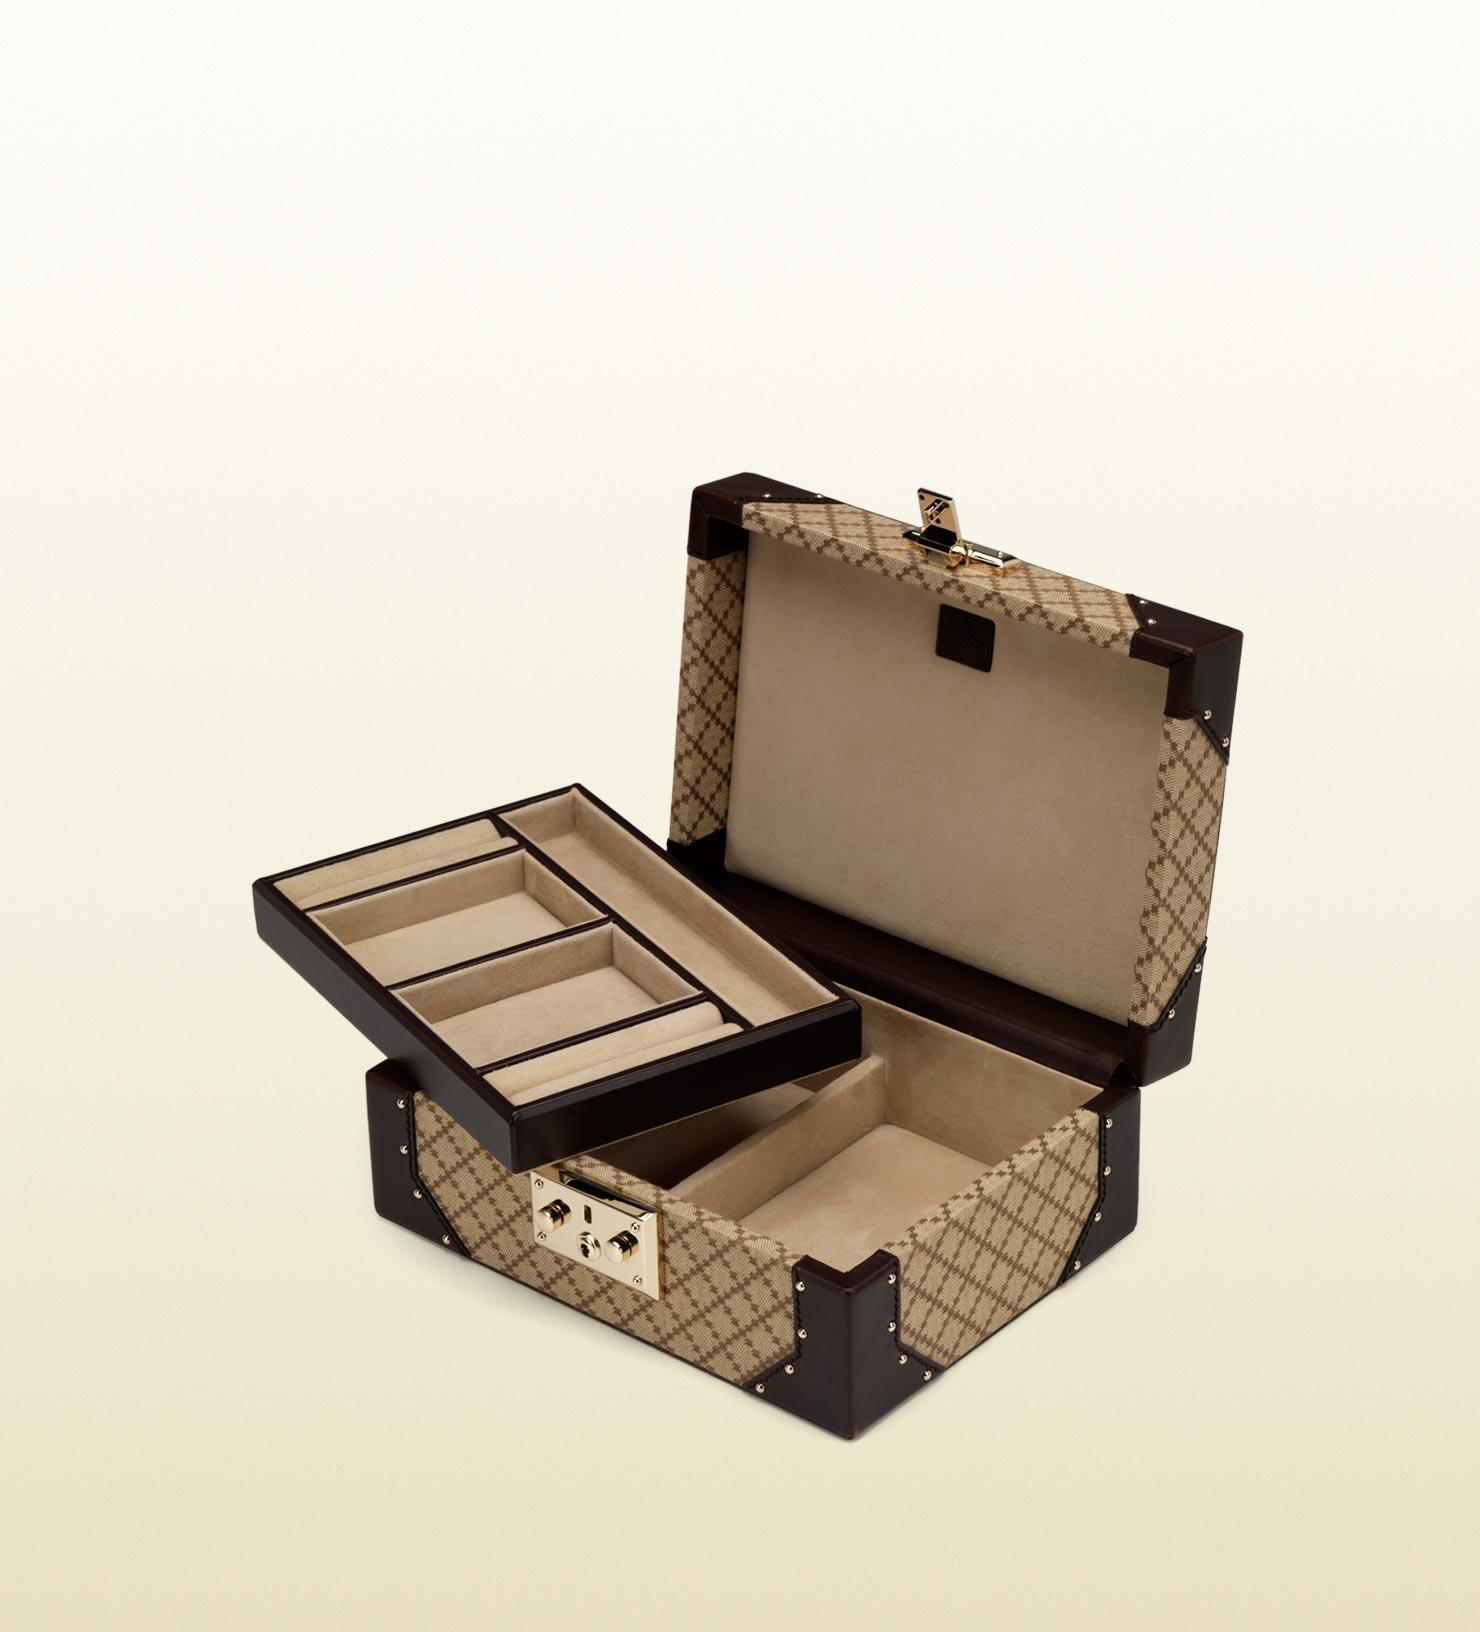 Gucci Jewelry Case in Natural for Men